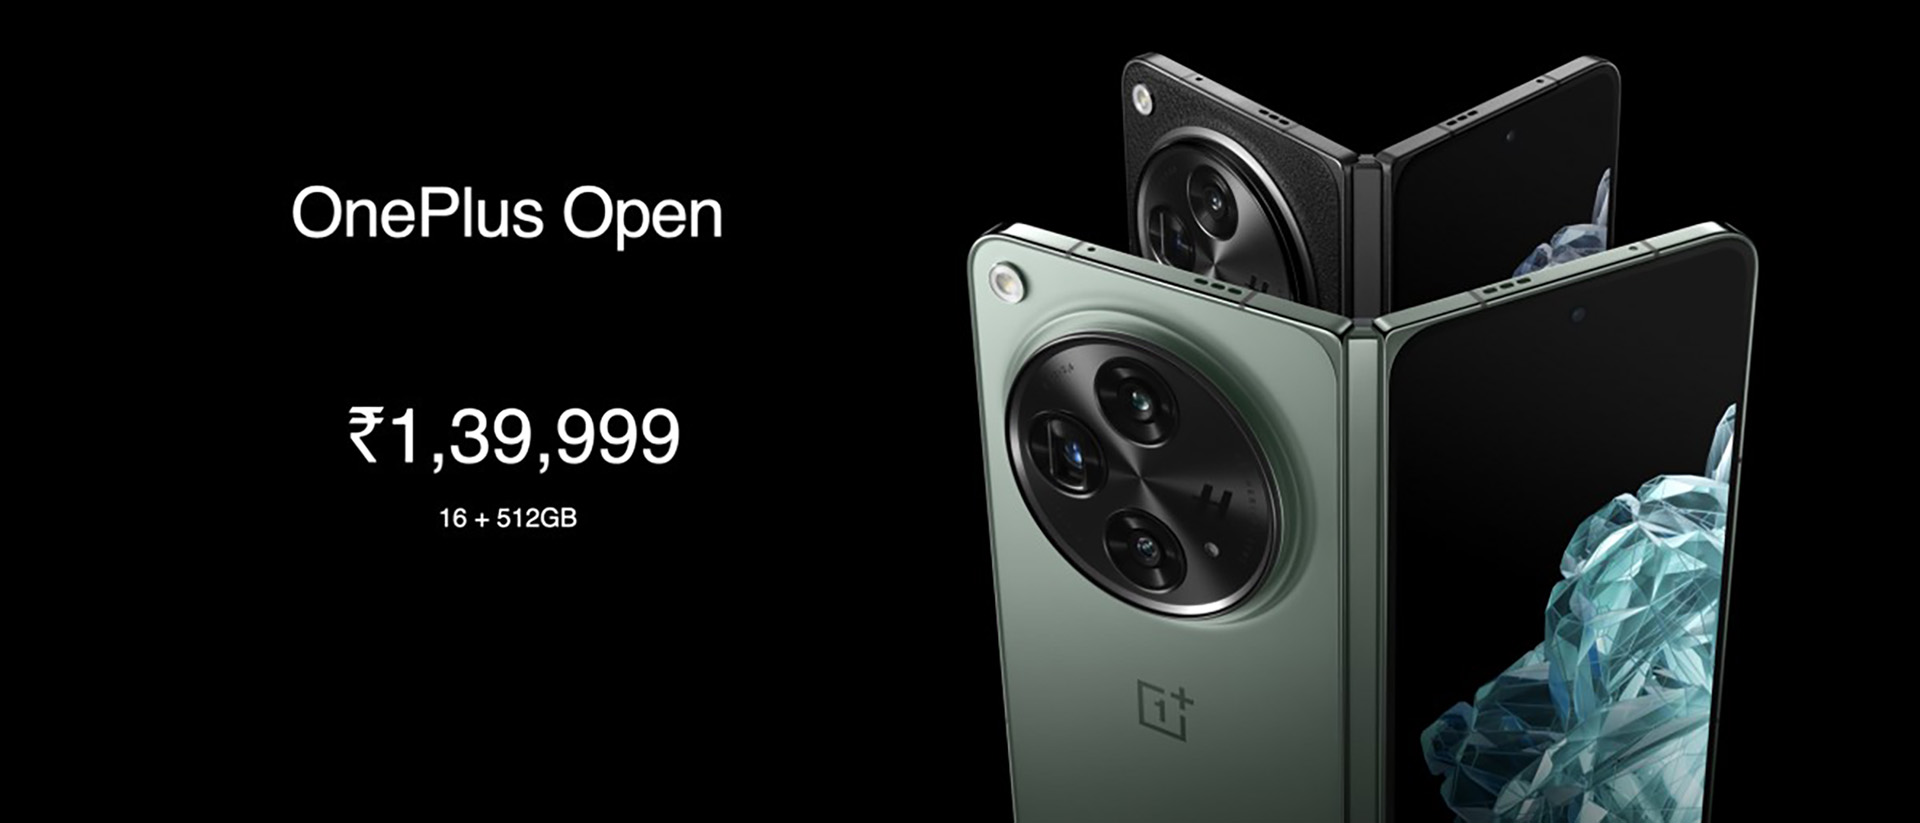 OnePlus Open is here, who is buying one?